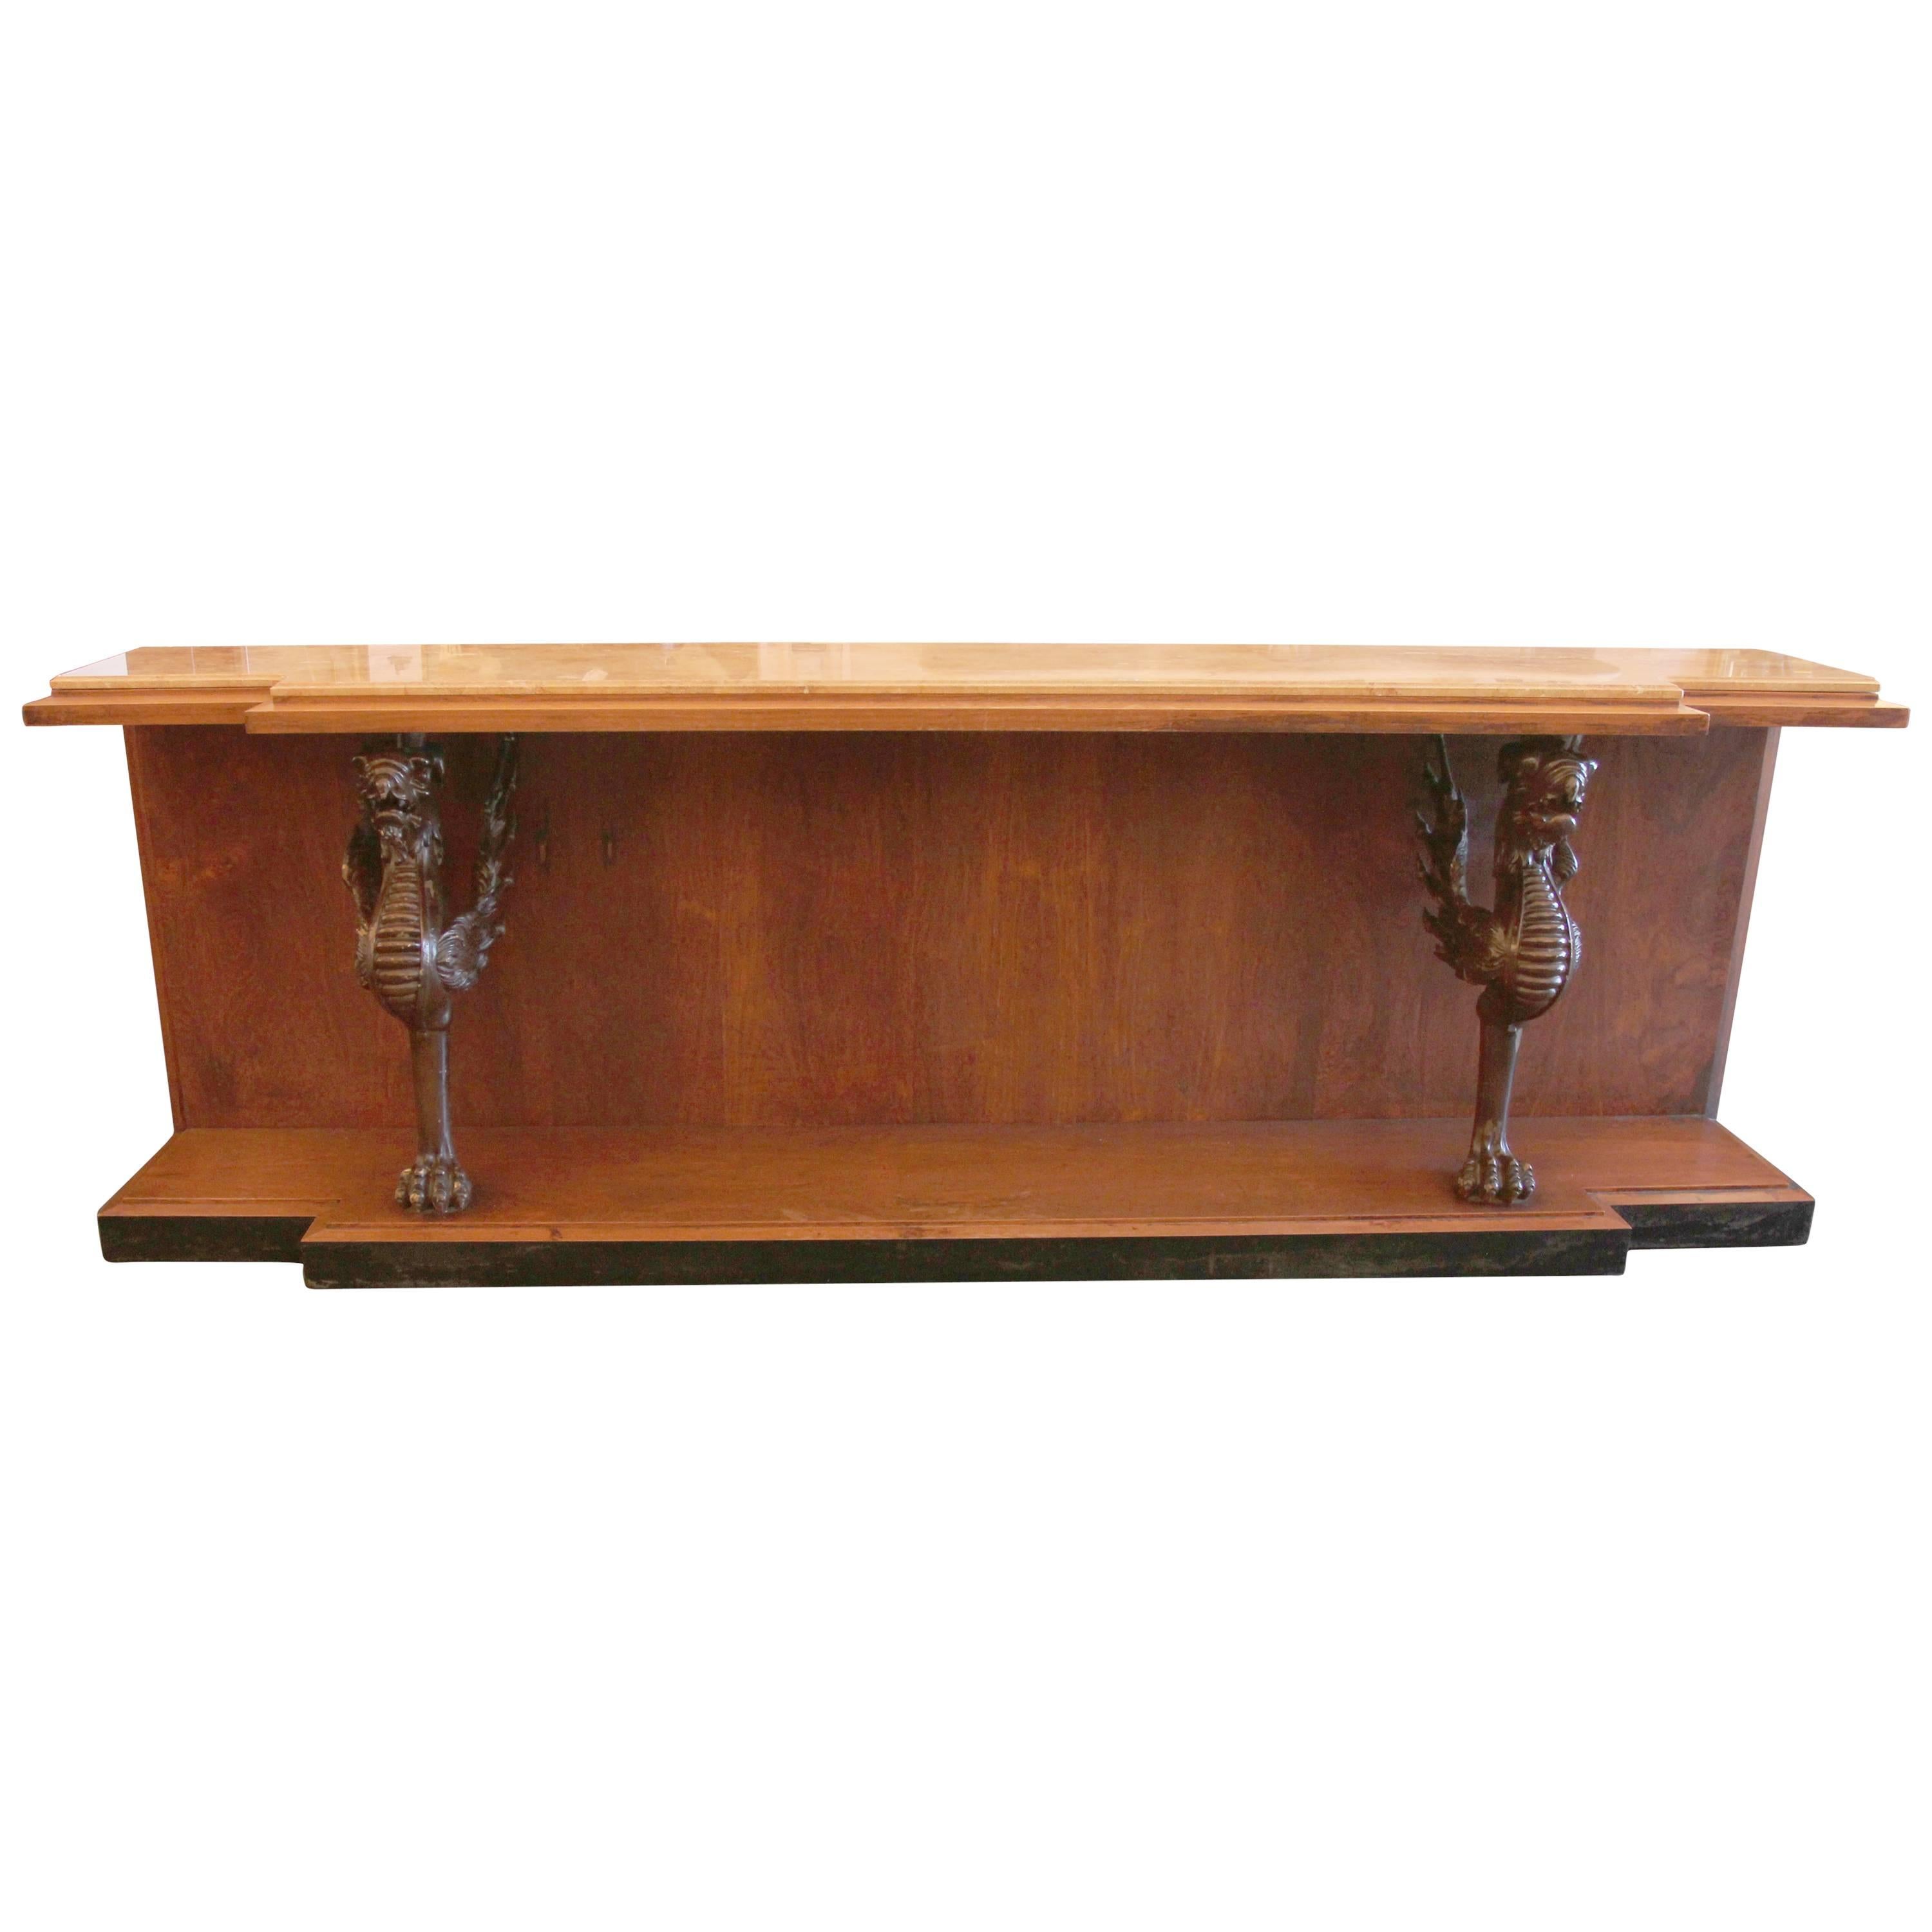 1980s Walnut Console Table with Marble Top and Antique Carved Wood Griffins